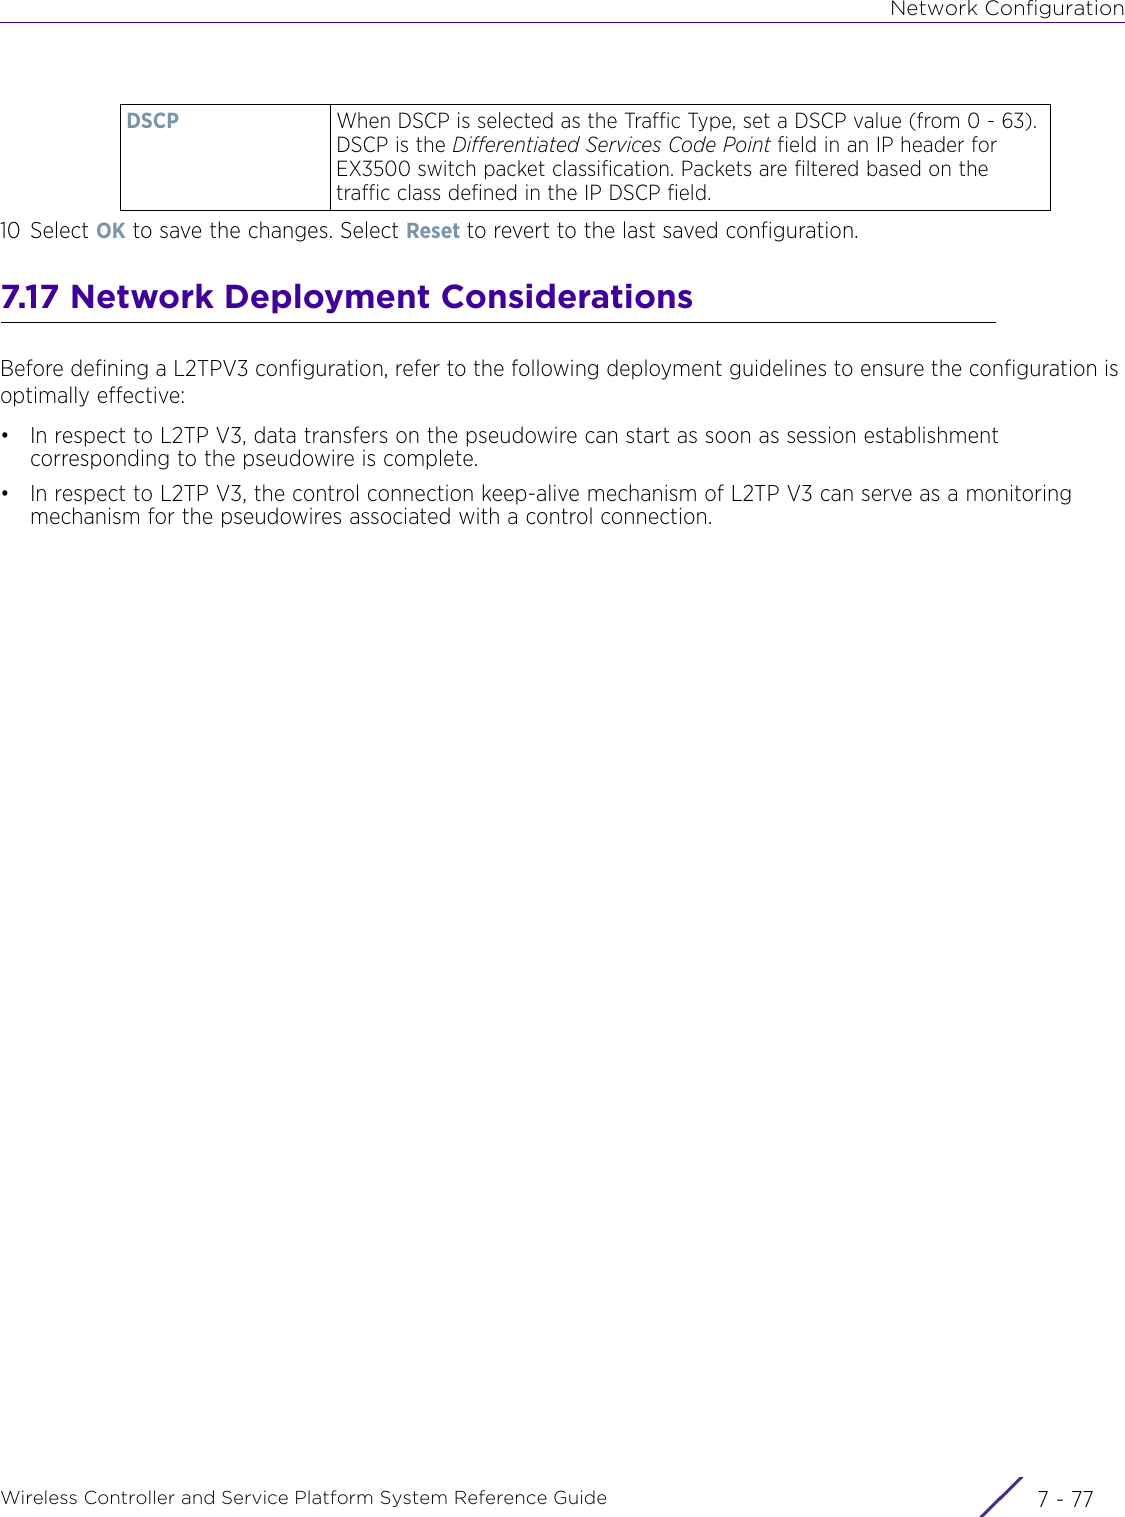 Network ConfigurationWireless Controller and Service Platform System Reference Guide 7 - 7710 Select OK to save the changes. Select Reset to revert to the last saved configuration.7.17 Network Deployment ConsiderationsBefore defining a L2TPV3 configuration, refer to the following deployment guidelines to ensure the configuration is optimally effective:• In respect to L2TP V3, data transfers on the pseudowire can start as soon as session establishment corresponding to the pseudowire is complete. • In respect to L2TP V3, the control connection keep-alive mechanism of L2TP V3 can serve as a monitoring mechanism for the pseudowires associated with a control connection.DSCP When DSCP is selected as the Traffic Type, set a DSCP value (from 0 - 63). DSCP is the Differentiated Services Code Point field in an IP header for EX3500 switch packet classification. Packets are filtered based on the traffic class defined in the IP DSCP field.